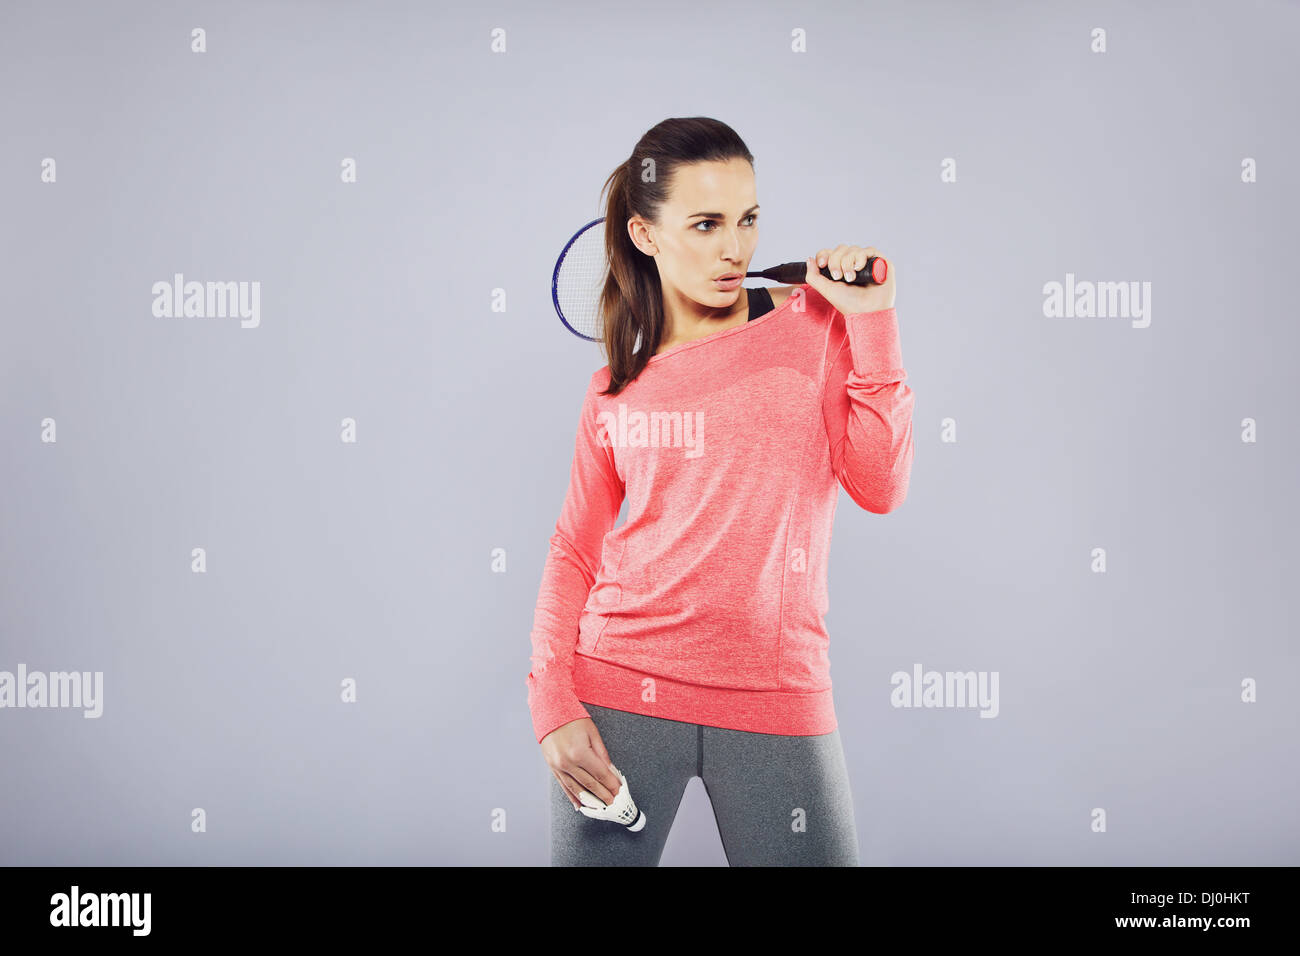 Pretty fit woman holding badminton racket looking at copyspace while standing over grey background Stock Photo